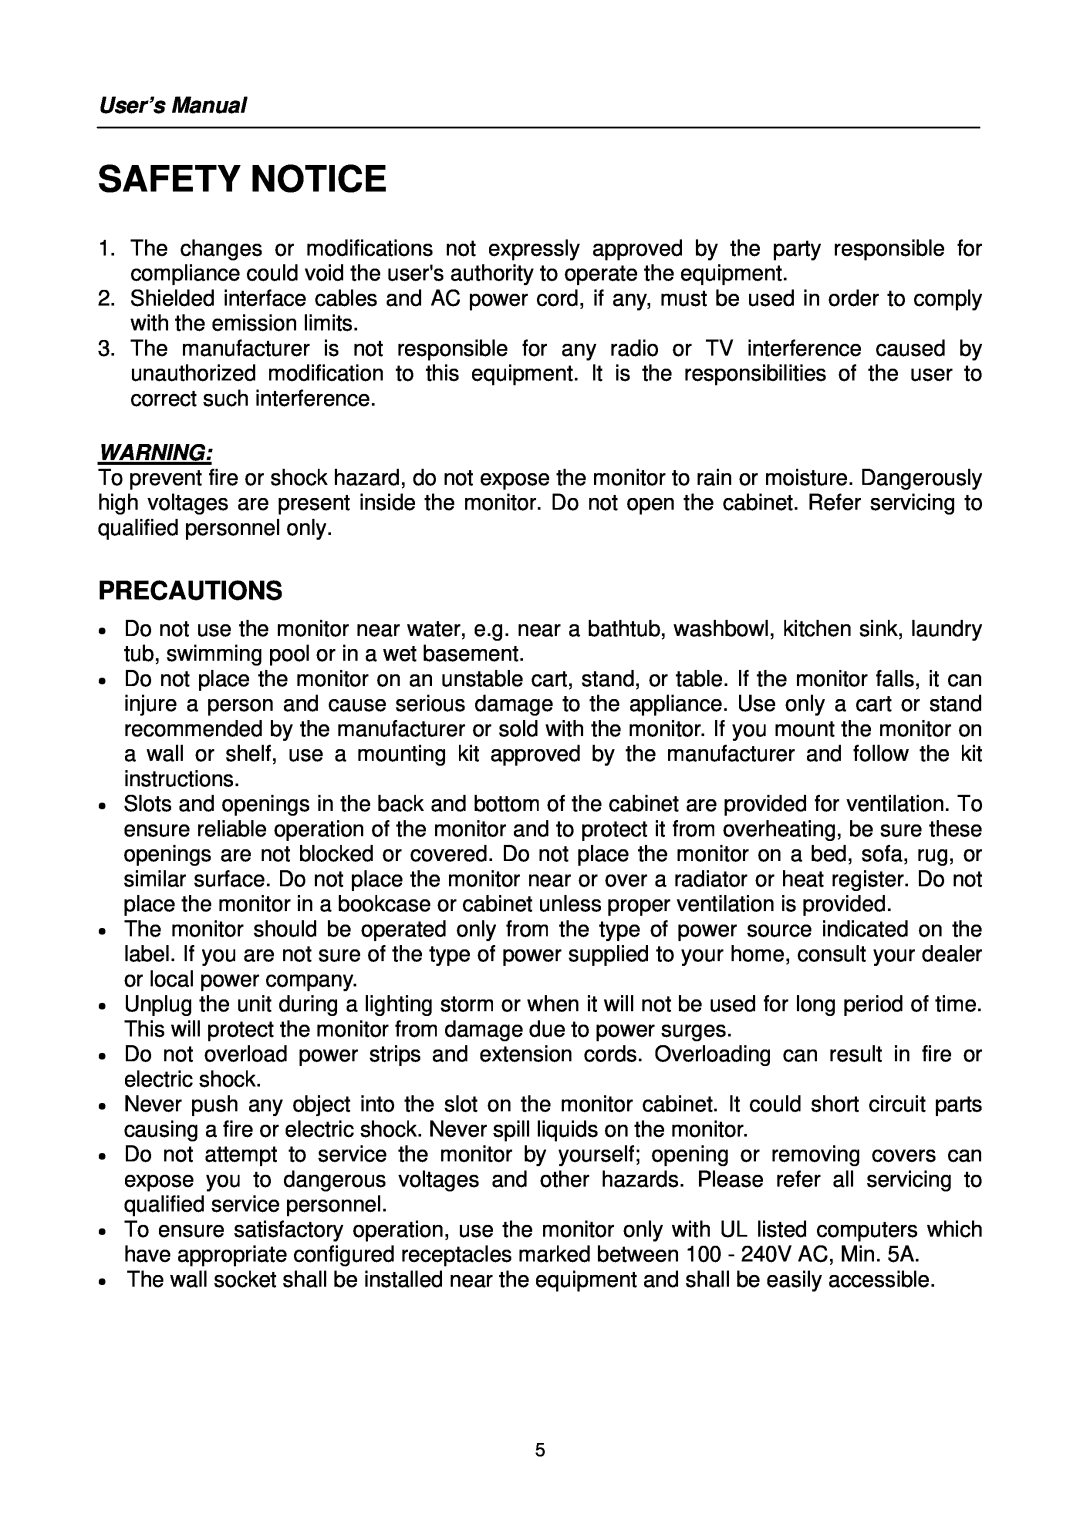 Hanns.G HB171 user manual Safety Notice, User’s Manual 